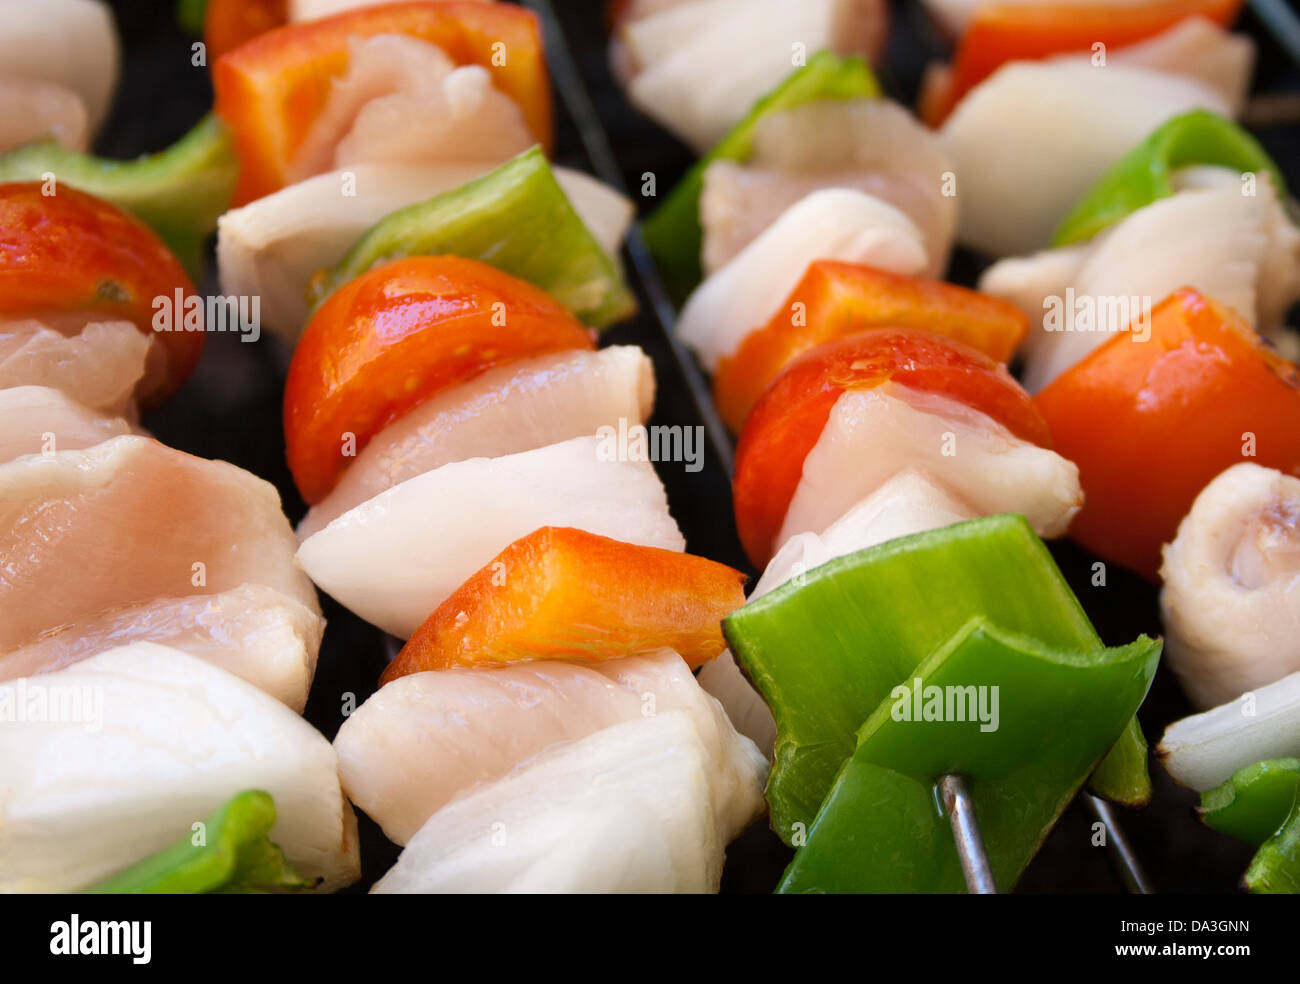 Chicken and vegetable skewers Stock Photo